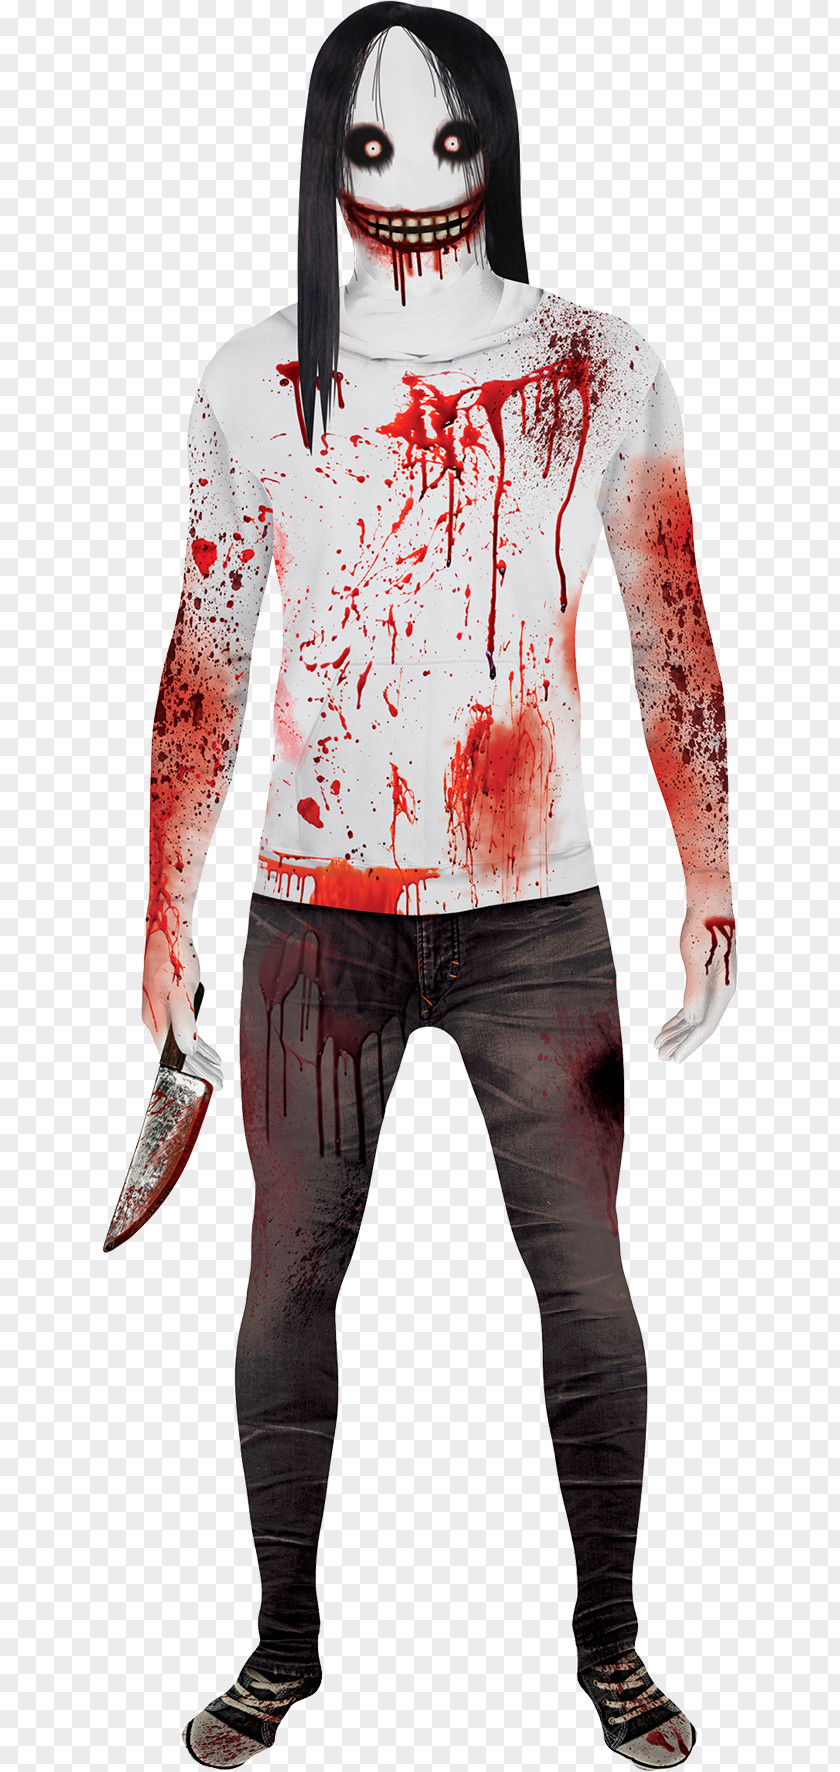 Suit Morphsuits Jeff The Killer BuyCostumes.com PNG